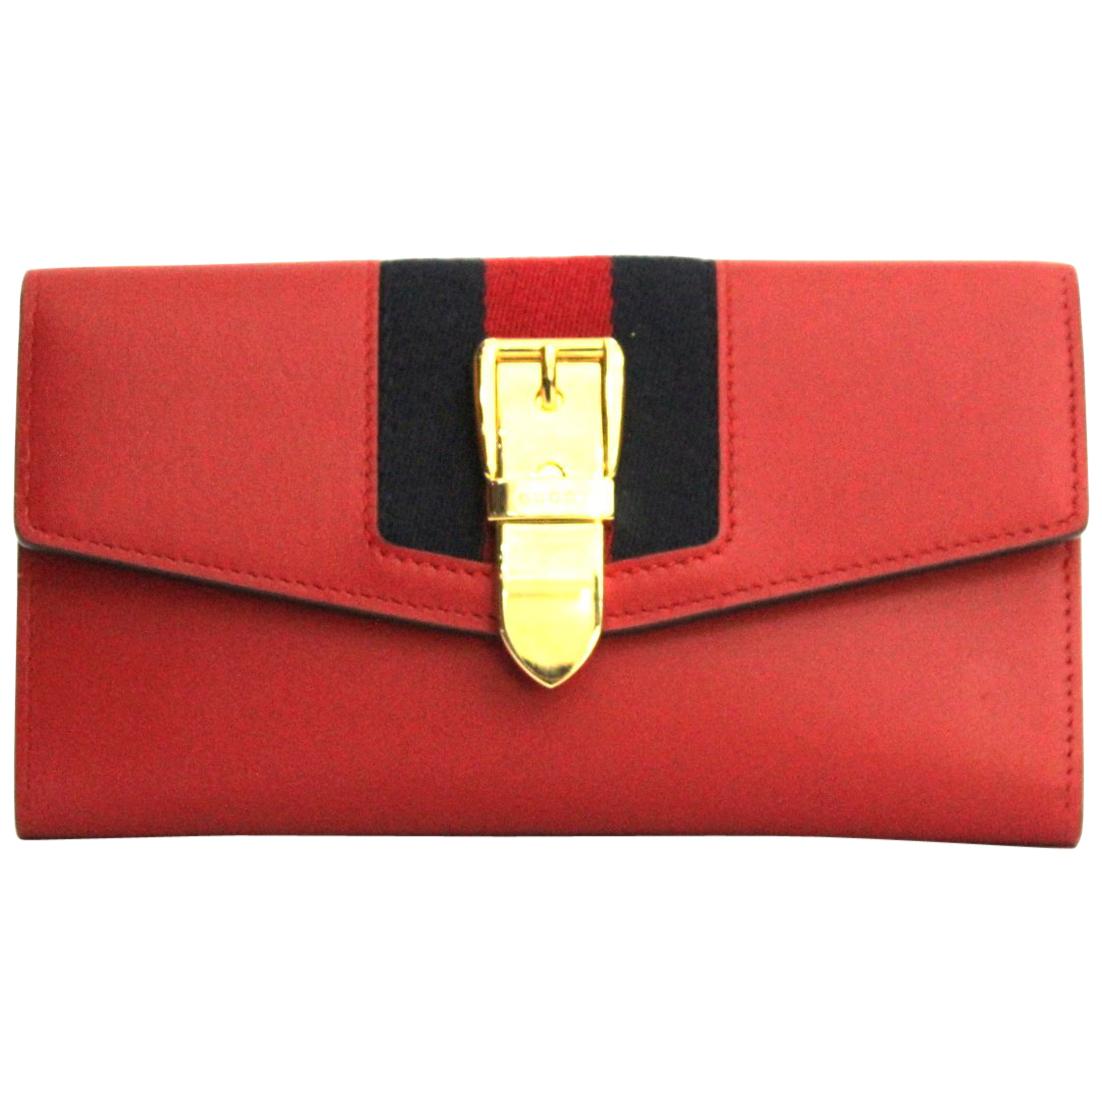 Gucci Sylvie Red Leather Continental Wallet